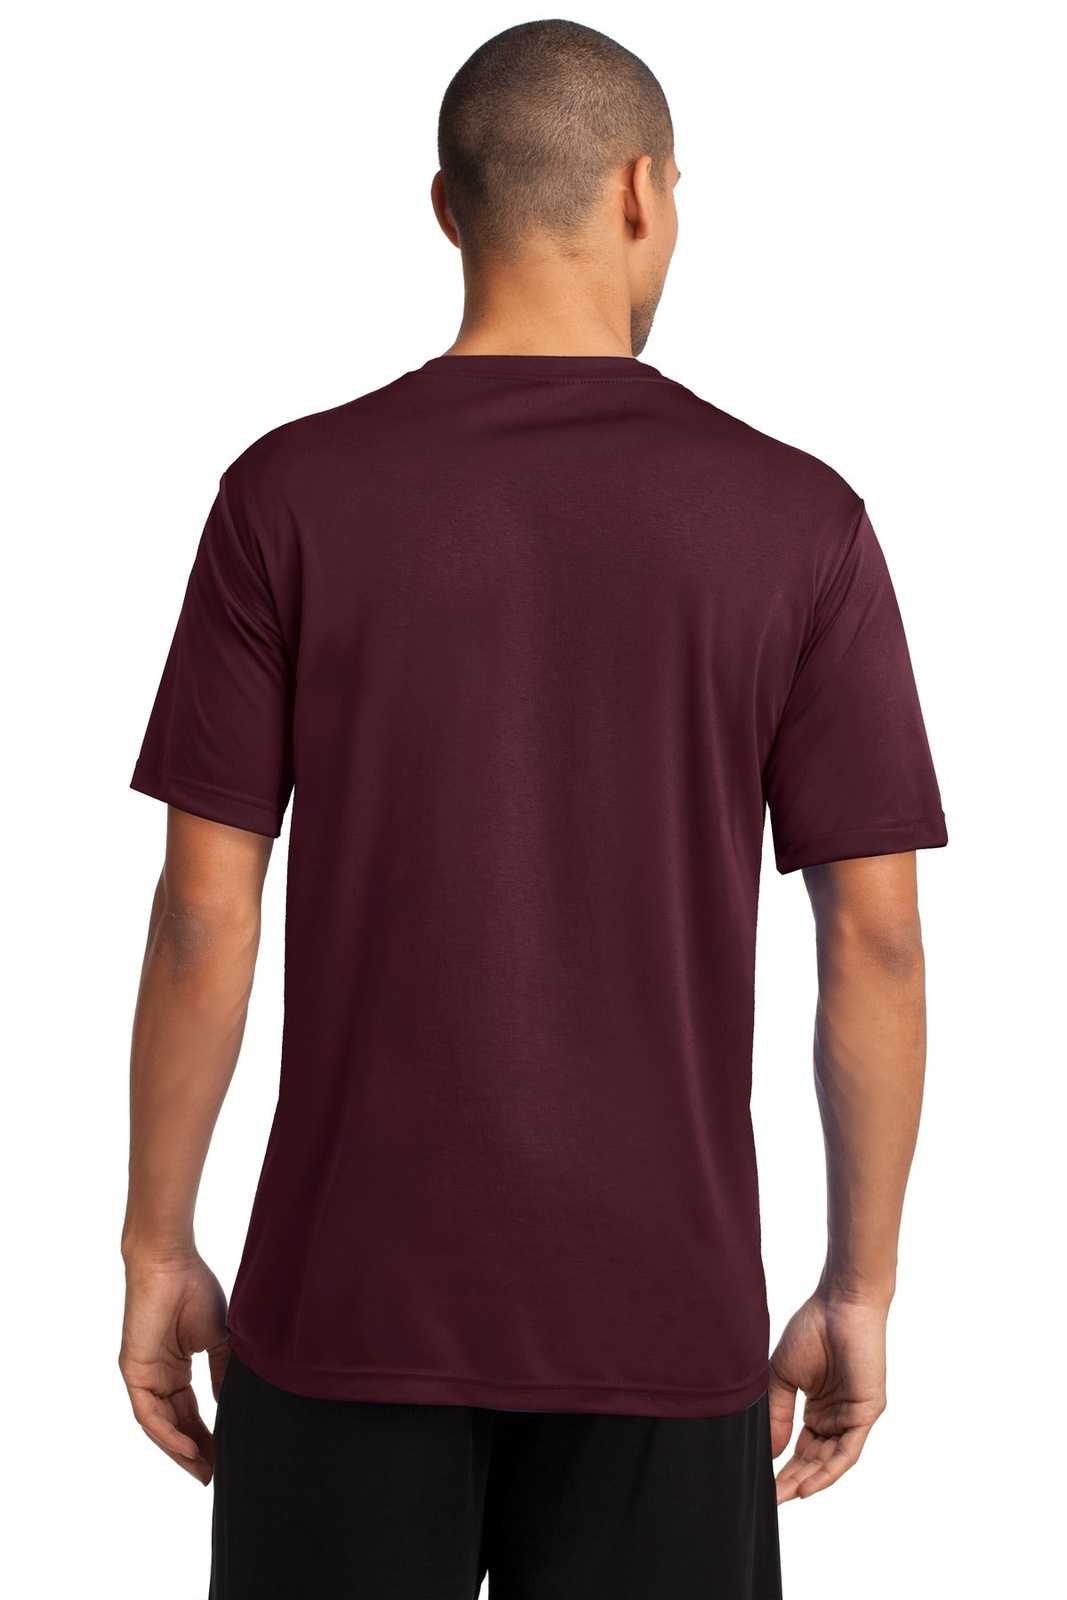 Port & Company PC380 Performance Tee - Athletic Maroon - HIT a Double - 1